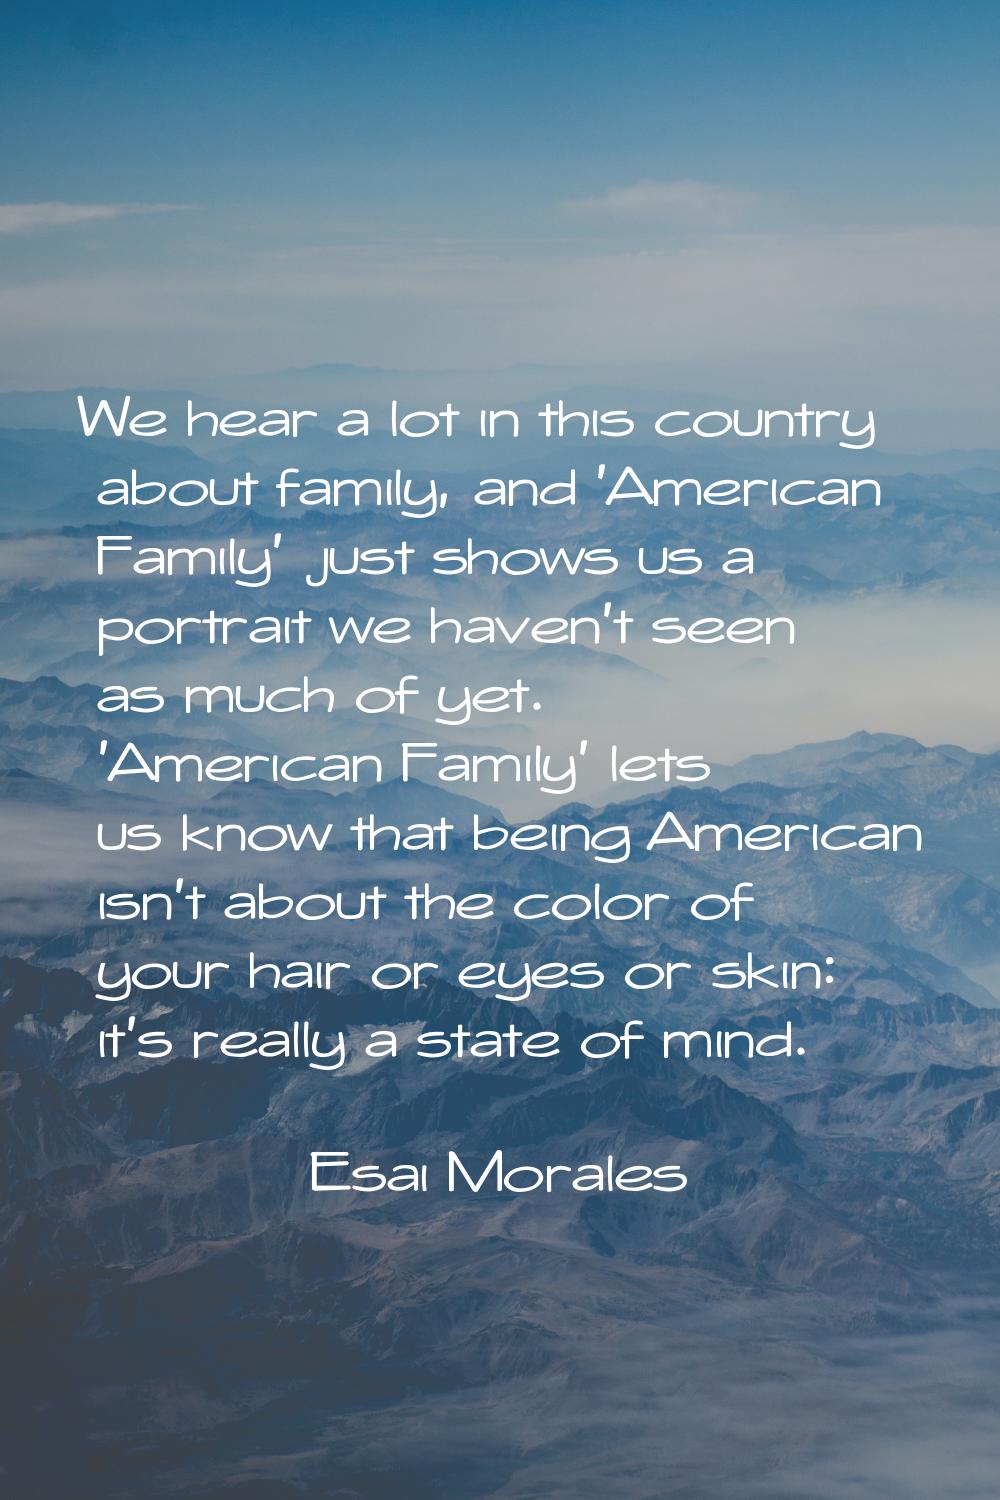 We hear a lot in this country about family, and 'American Family' just shows us a portrait we haven